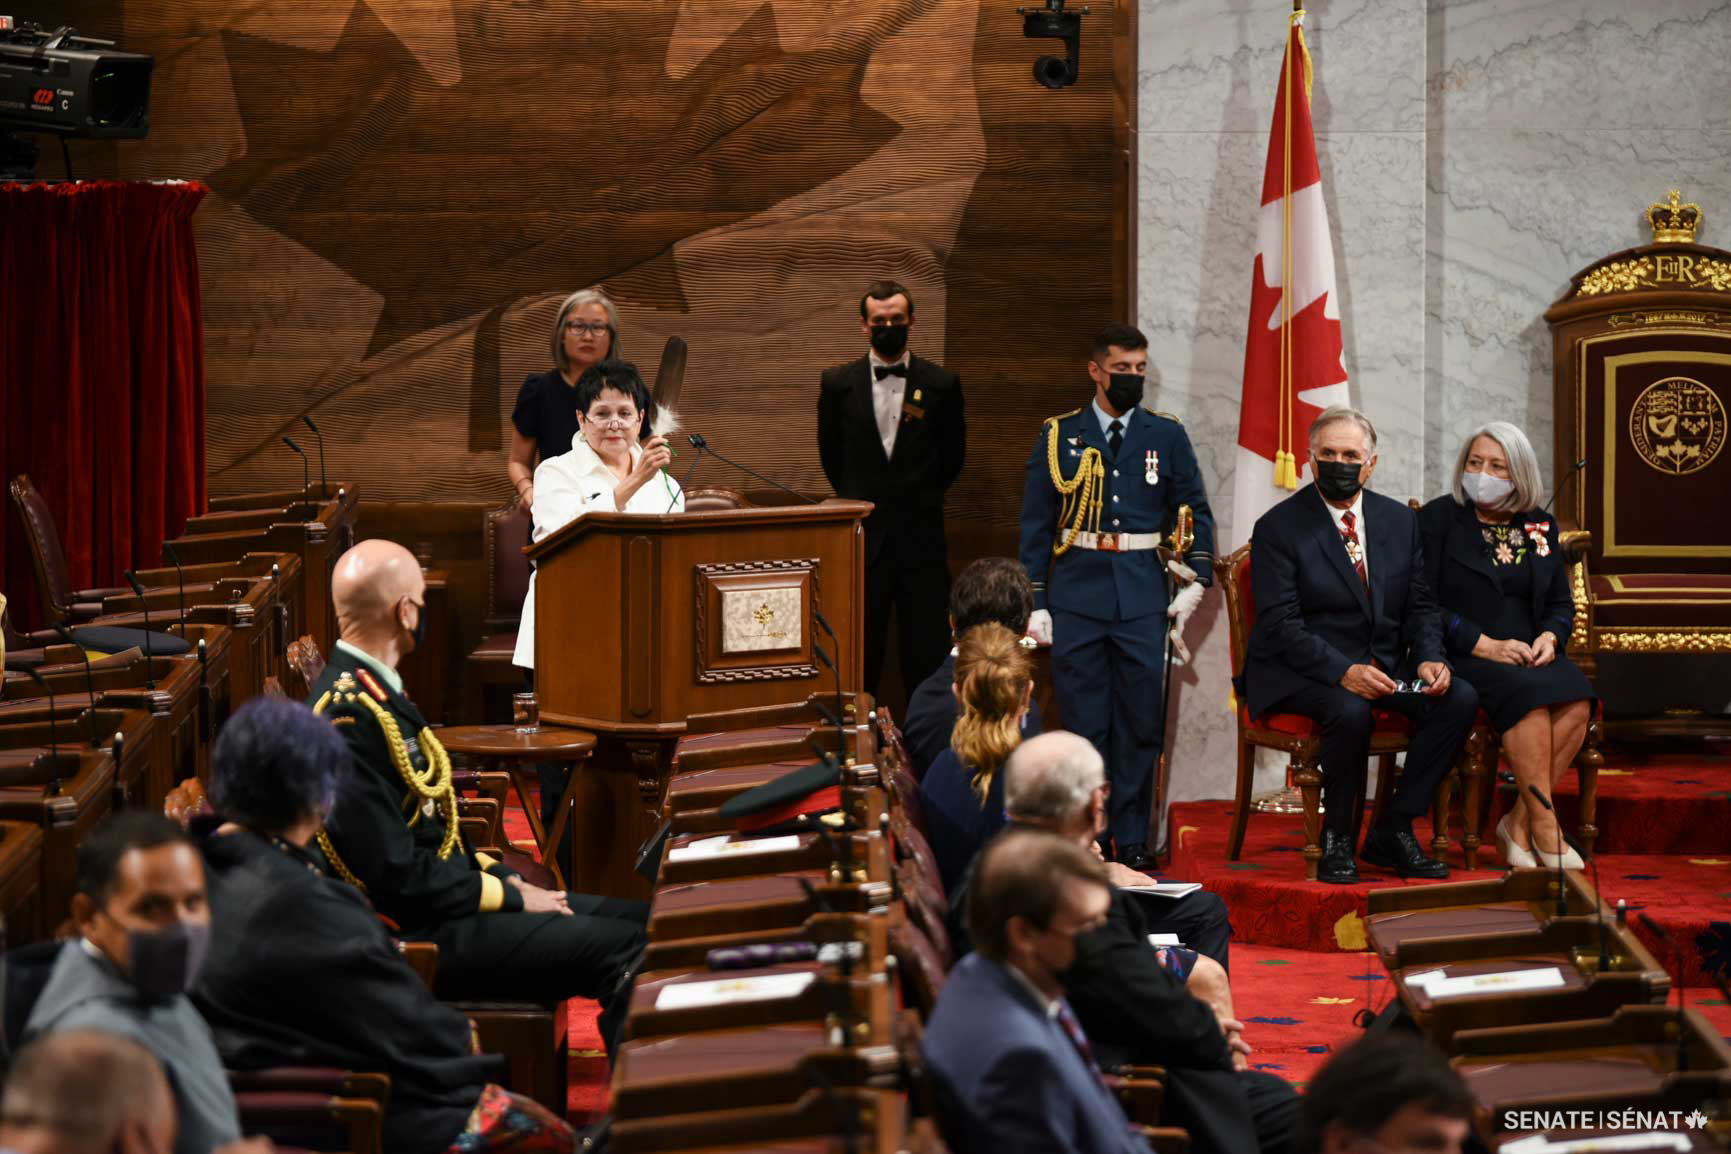 Governor General Mary Simon and her spouse Whit Fraser look on as Claudette Commanda, an Algonquin elder, welcomes guests at the installation ceremony.